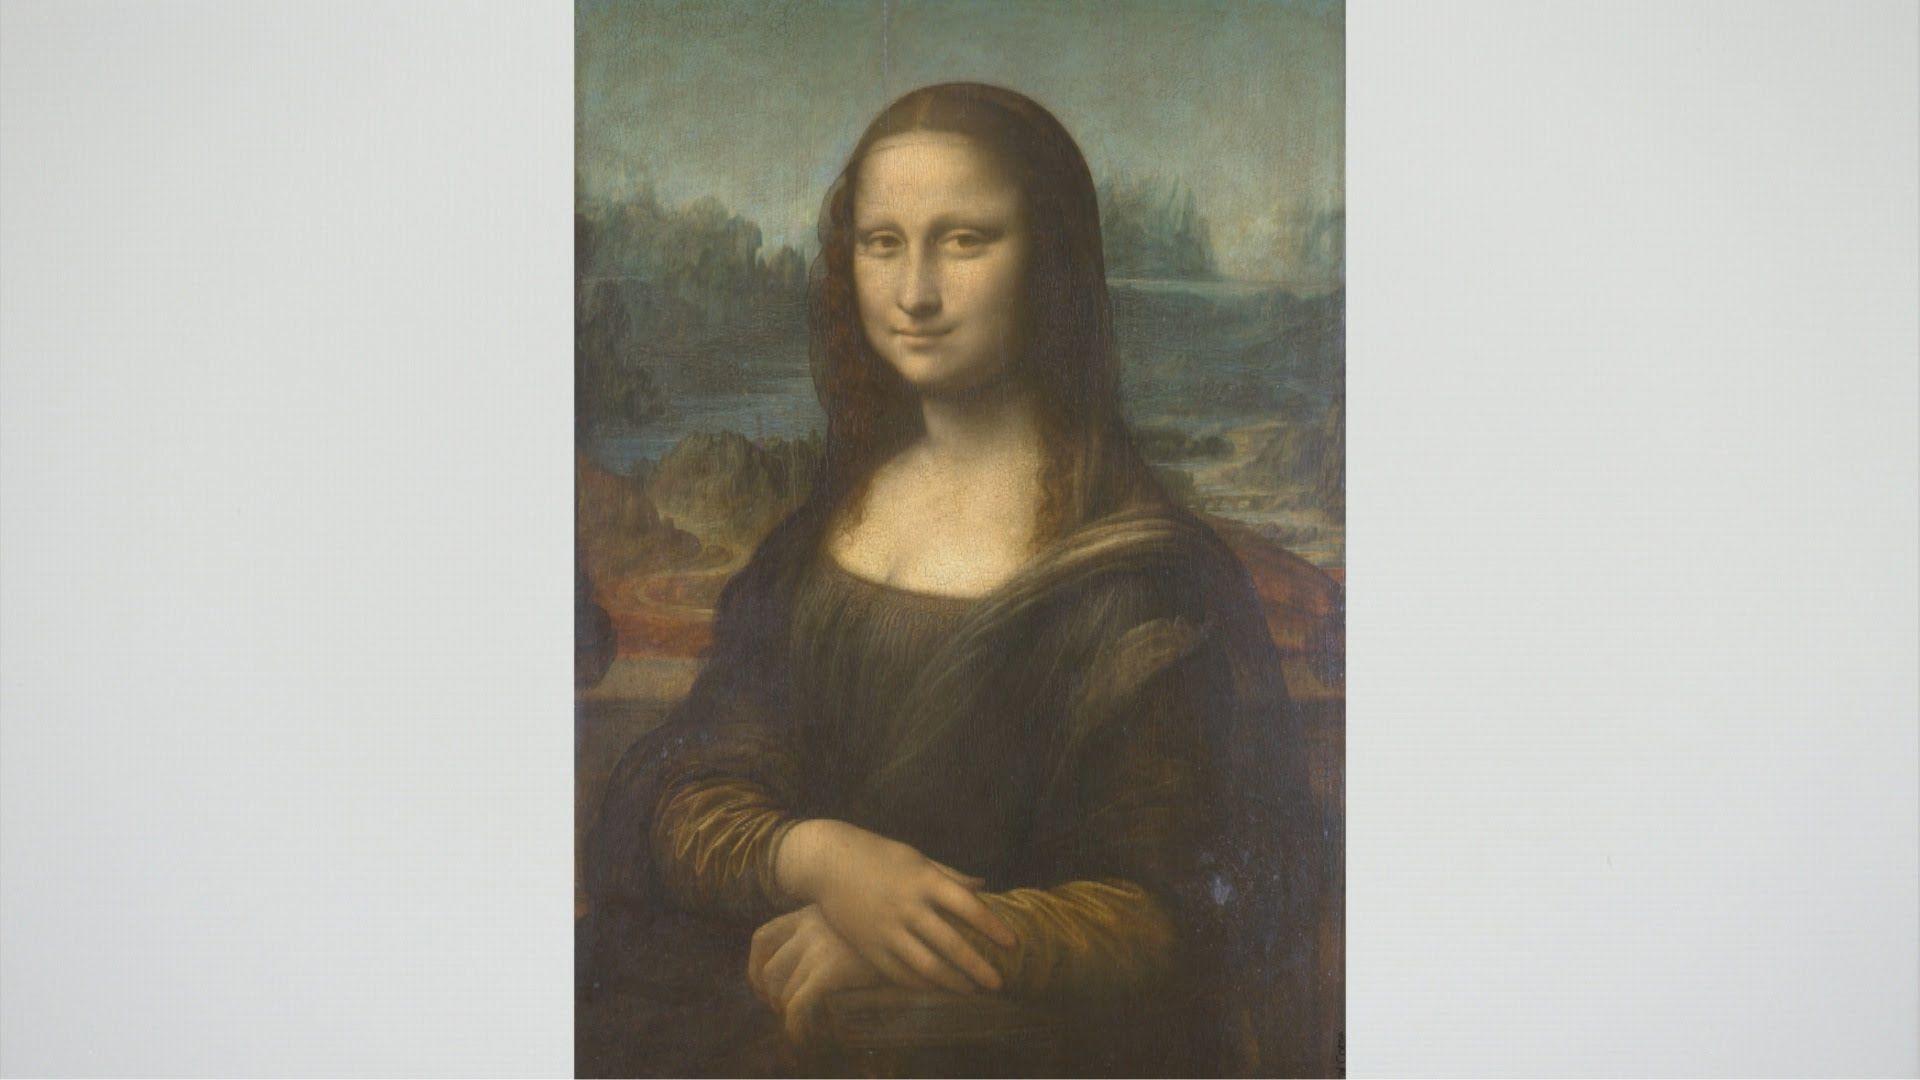 New evidence that the painting in the Louvre may not be the original